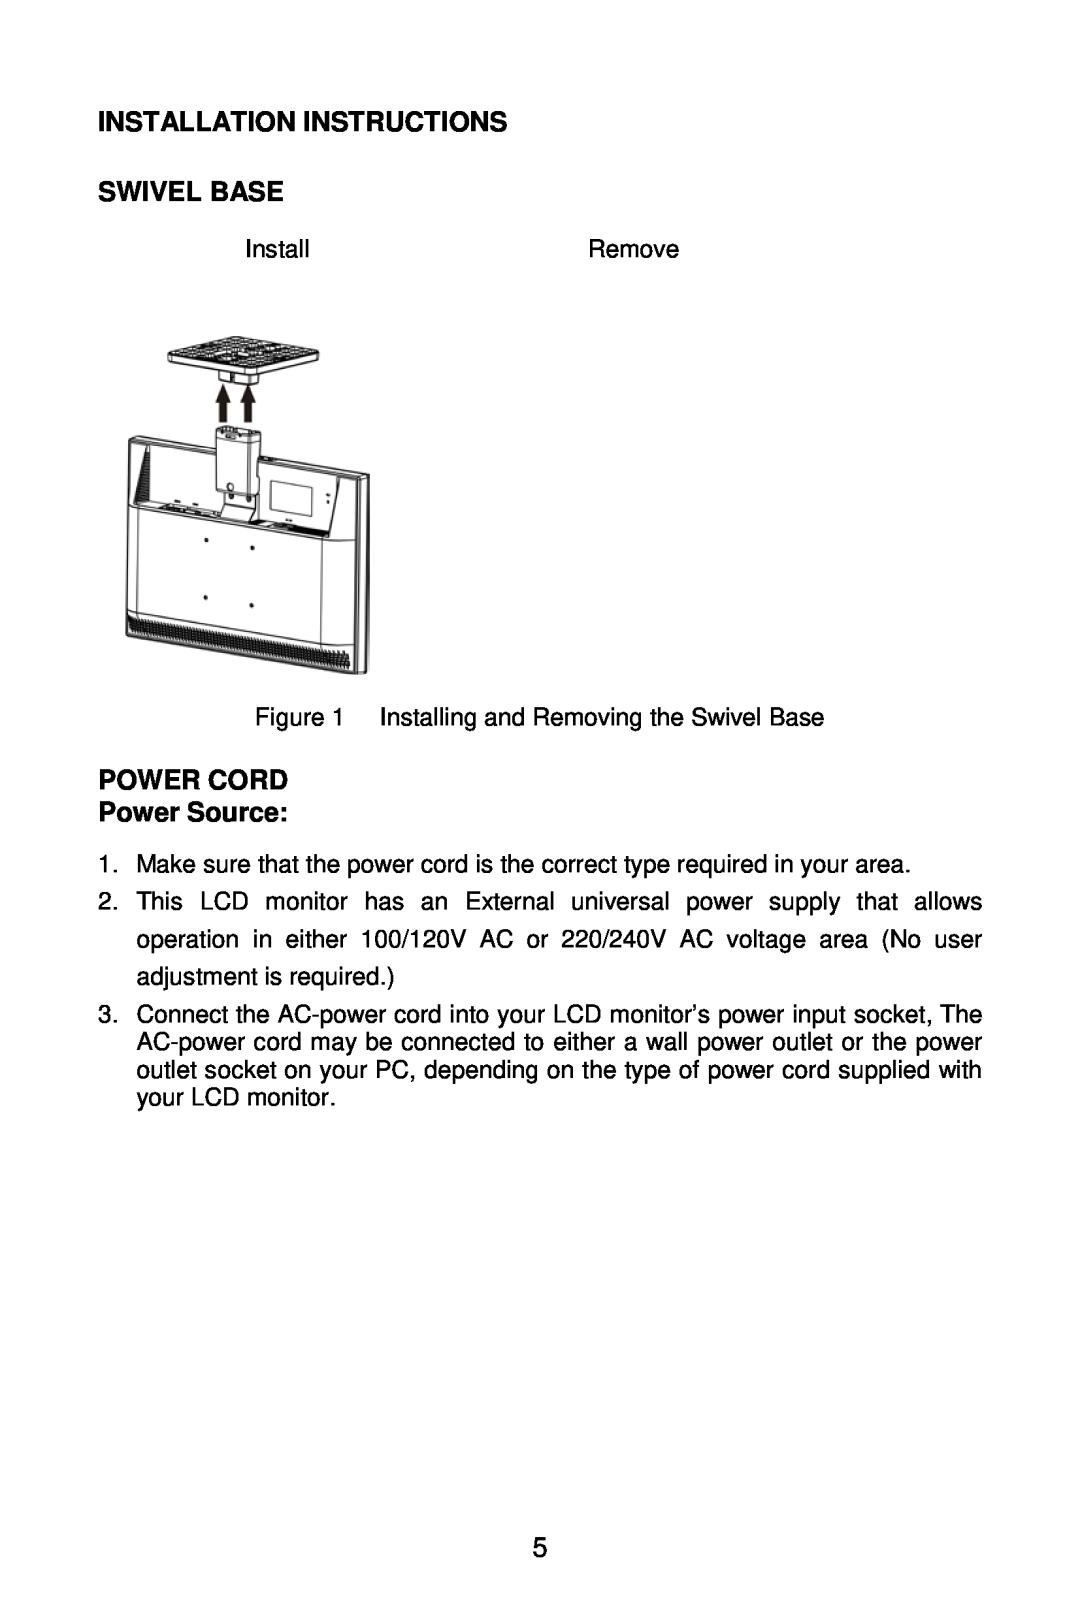 Envision Peripherals G2219 manual Installation Instructions Swivel Base, POWER CORD Power Source 